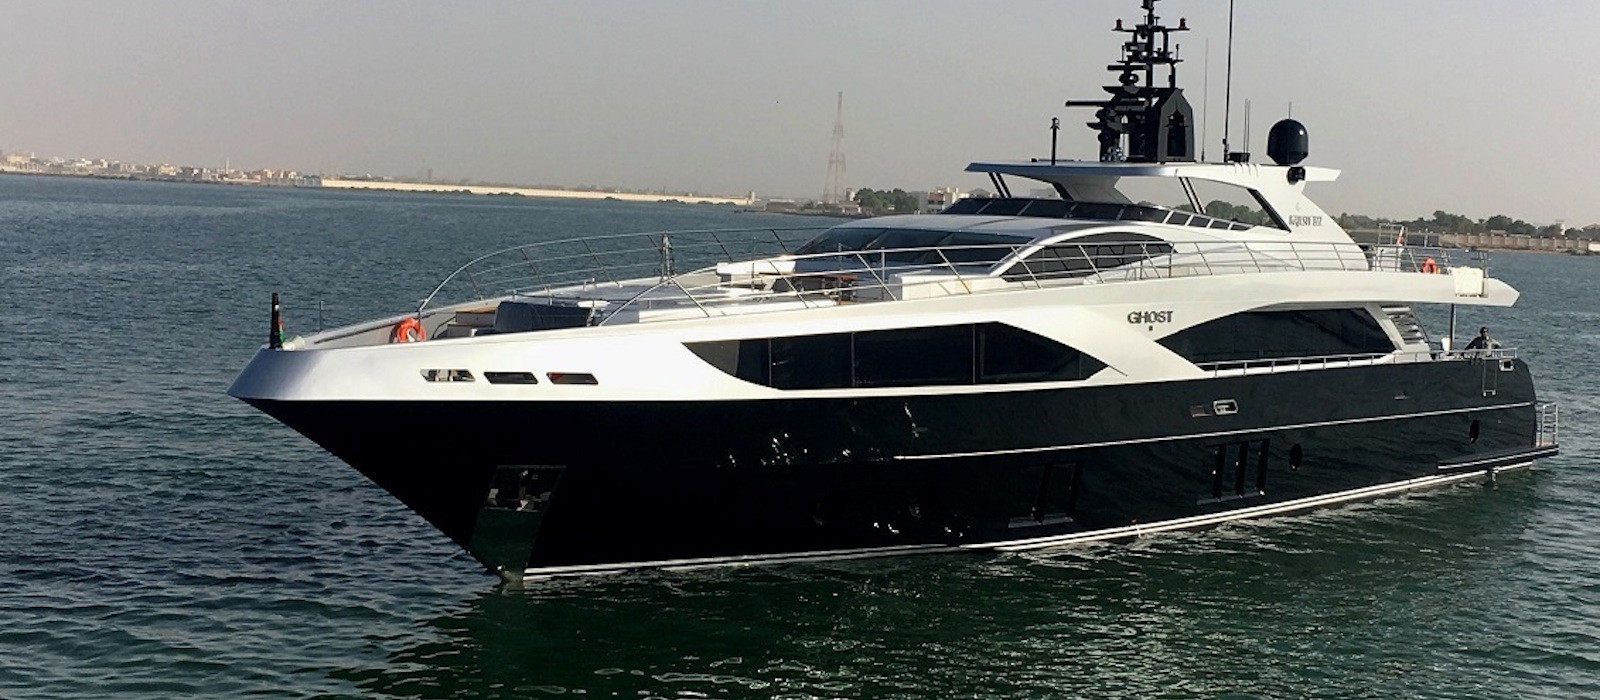 Bow view of Ghost II superyacht hire